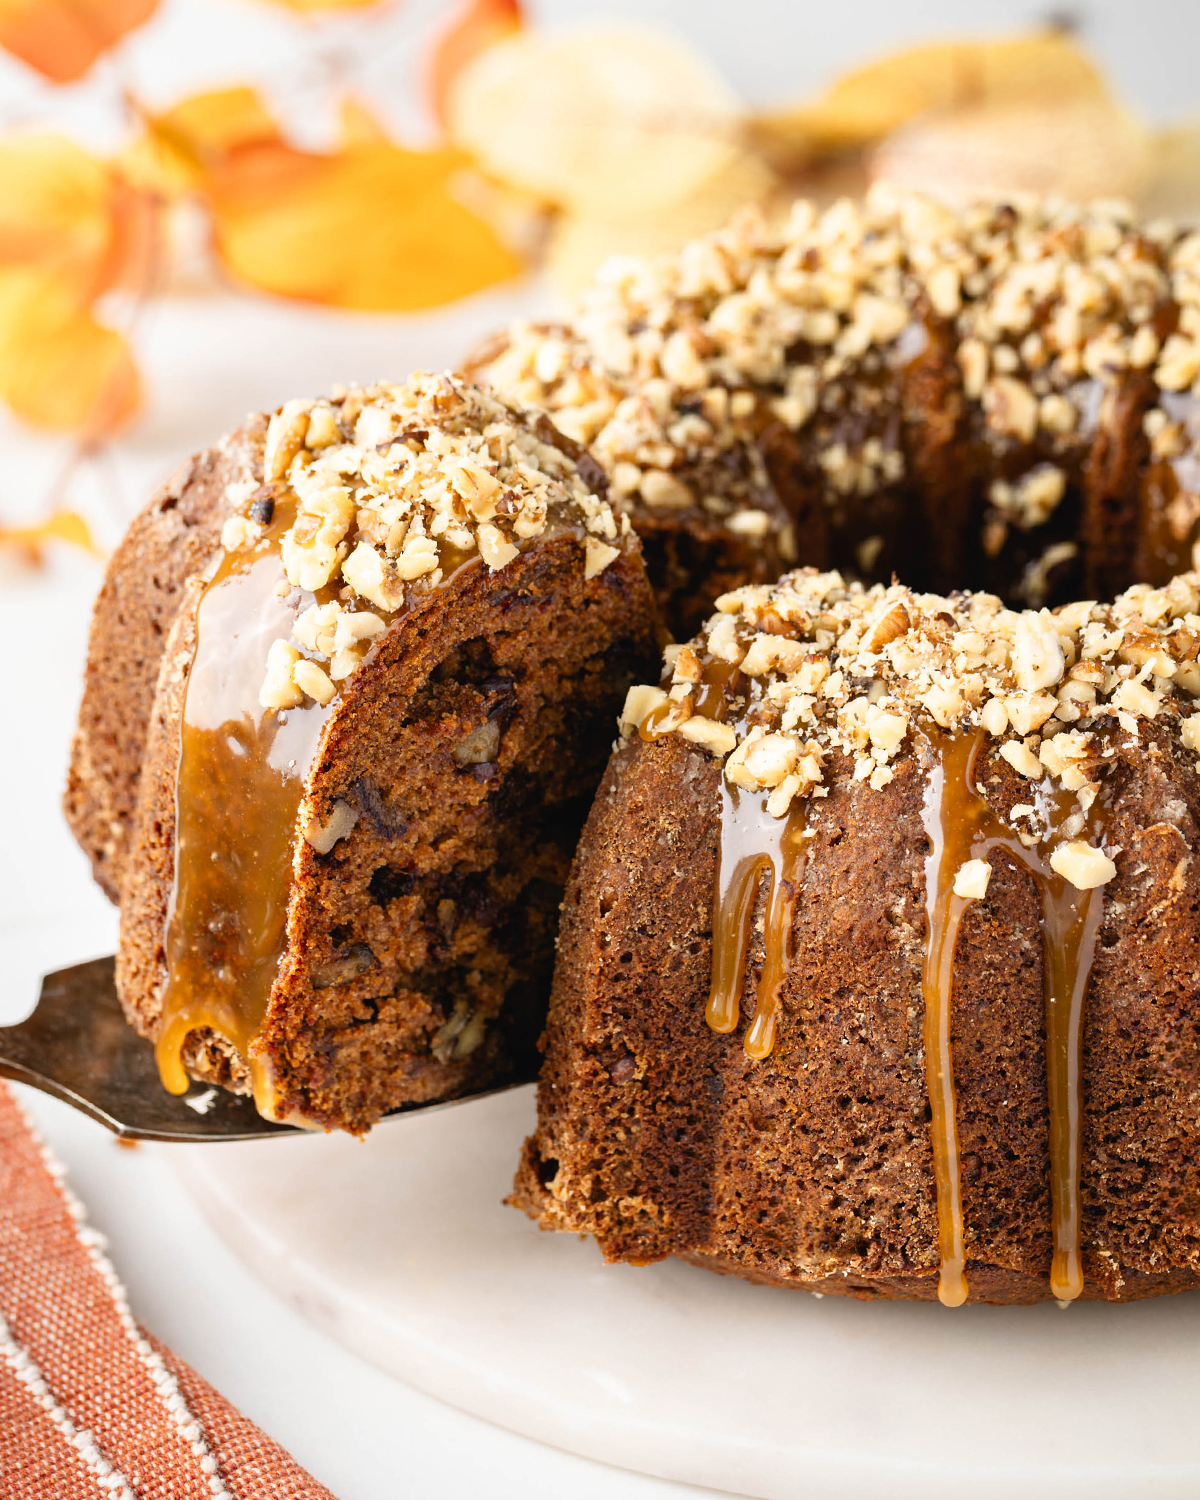 Apple Harvest Cake with Caramel Sauce - Lunds & Byerlys